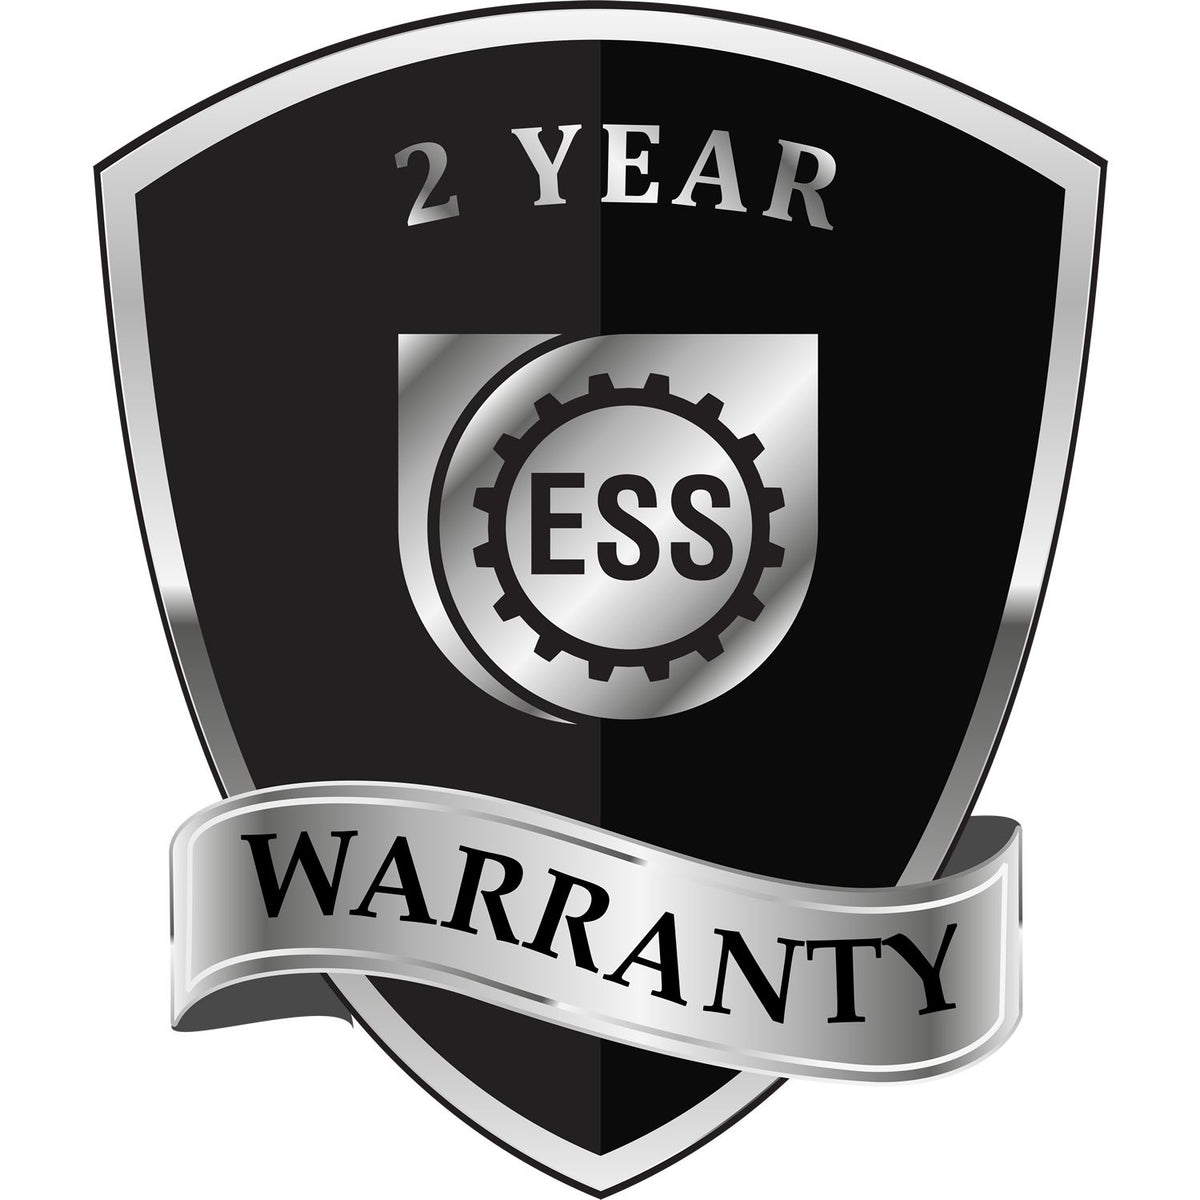 A black and silver badge or emblem showing warranty information for the State of Arkansas Extended Long Reach Geologist Seal